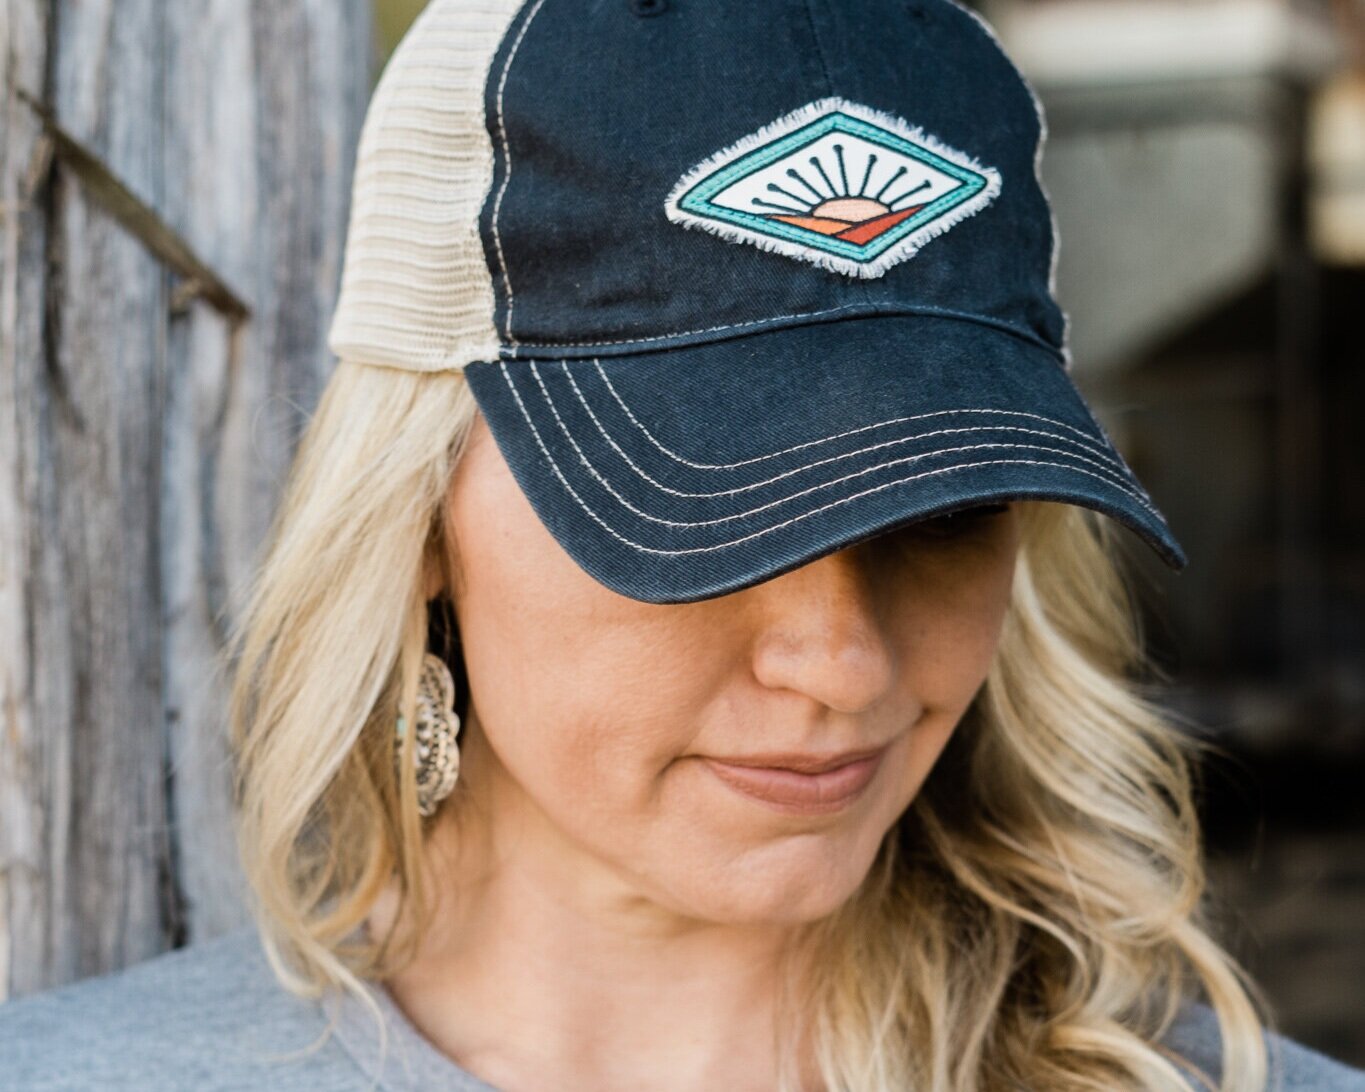 Shop our favorite farm themed products and apparel. | thisfarmwifeshop.com